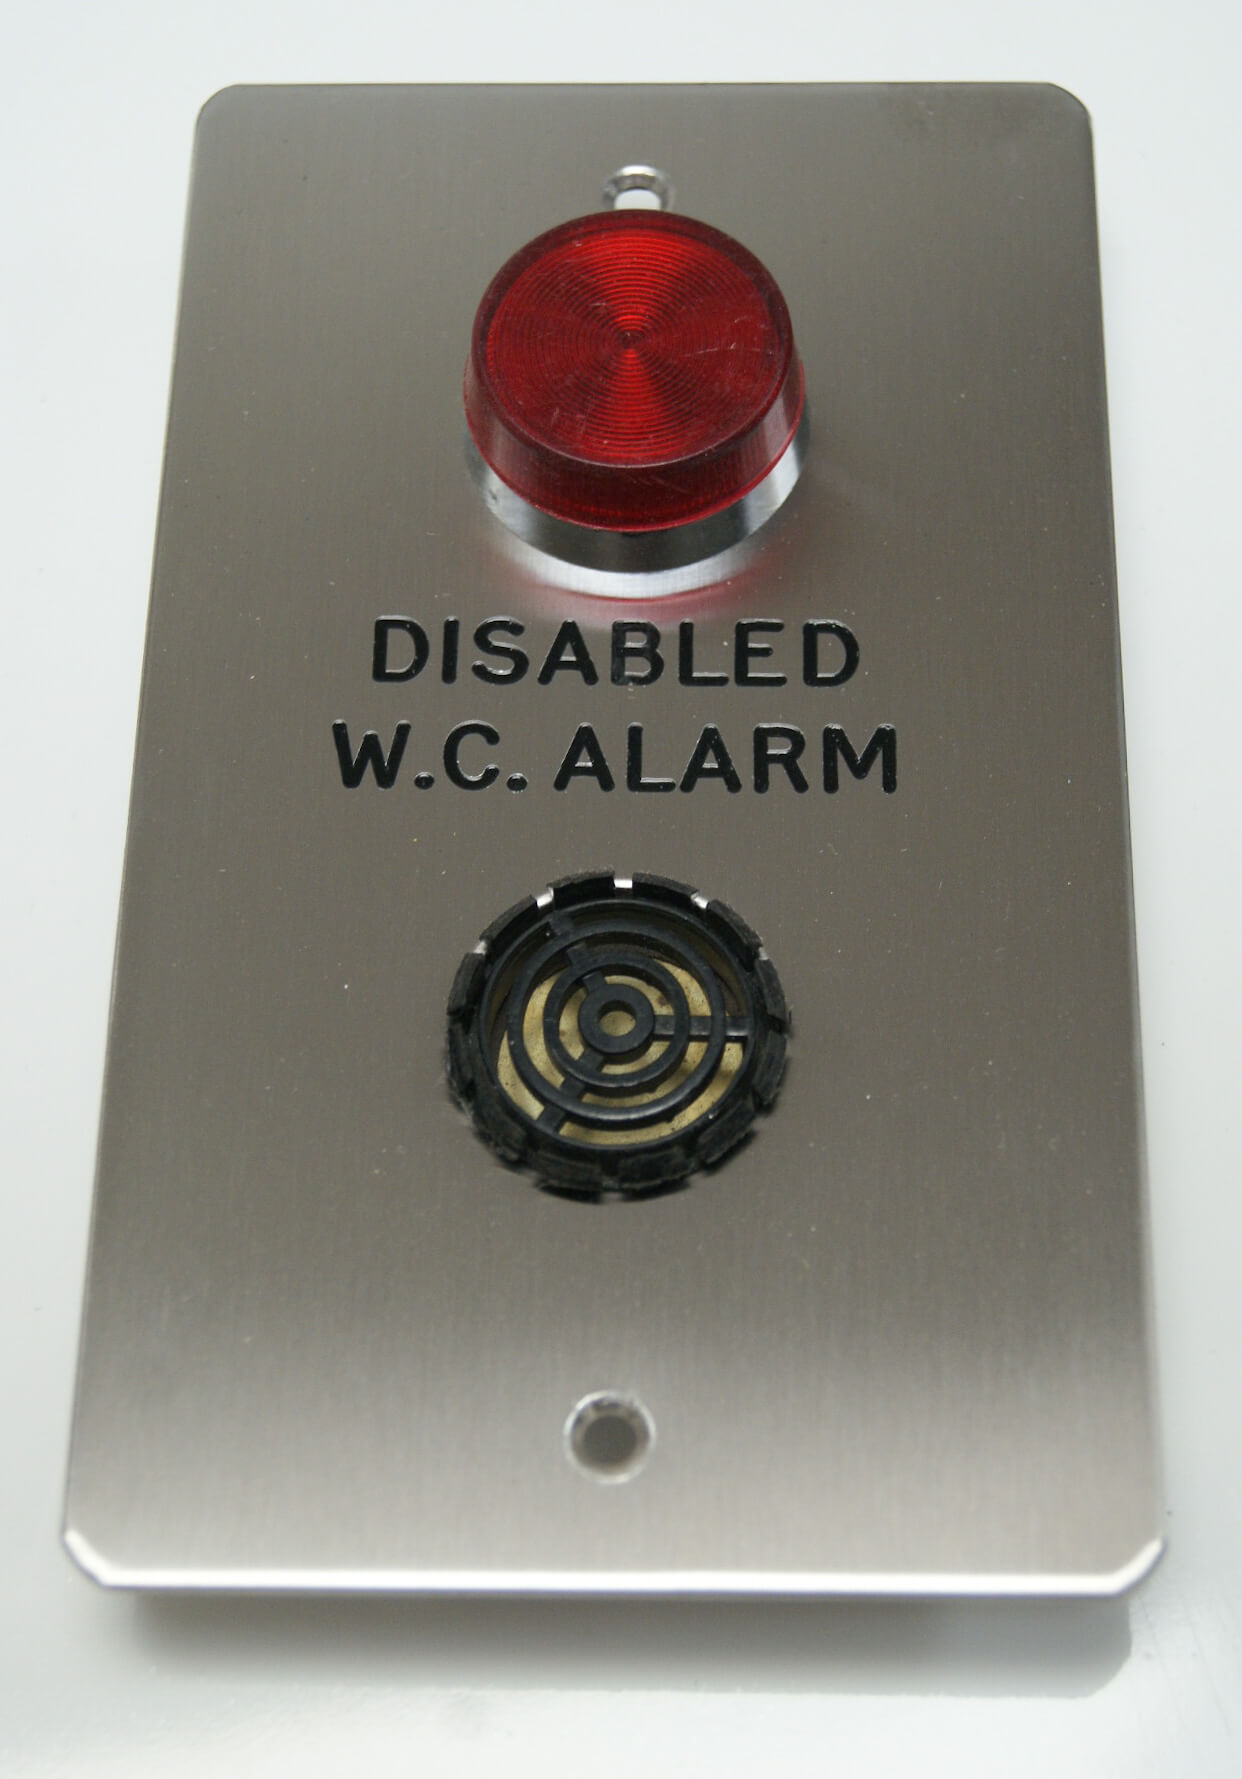 engraved disabled toilets alarm